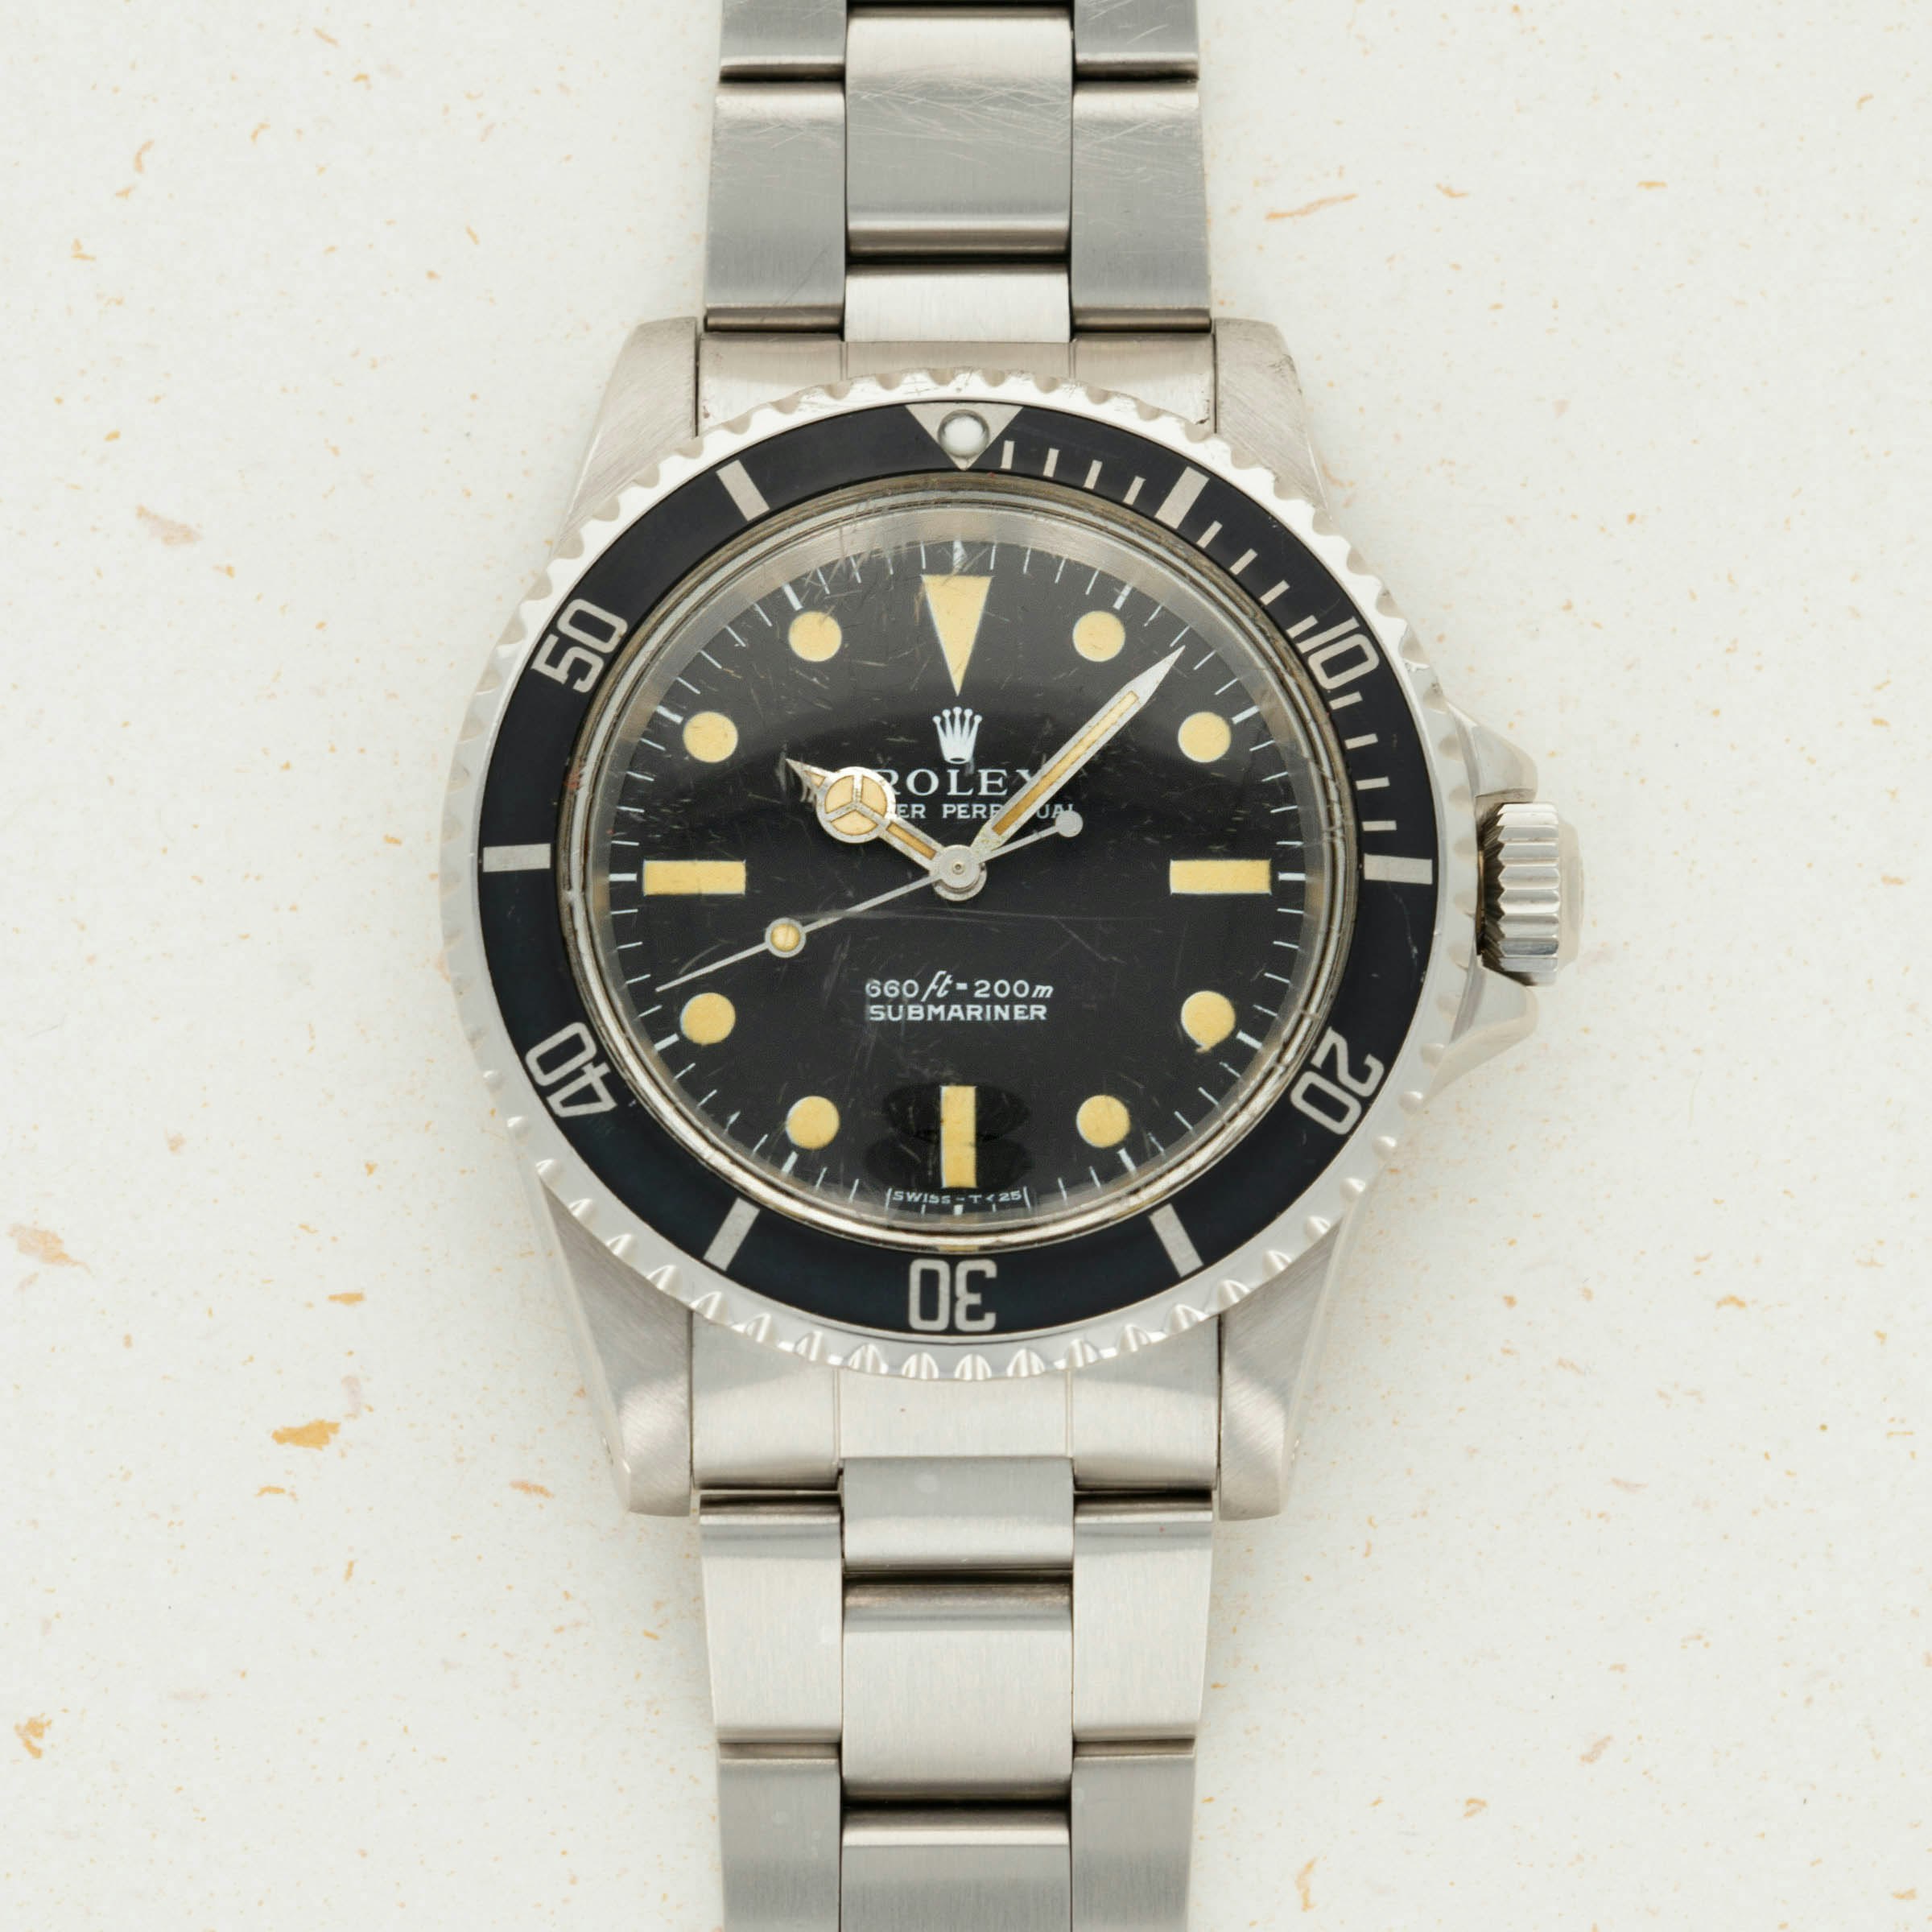 Thumbnail for Rolex Submariner Non-Date 5513